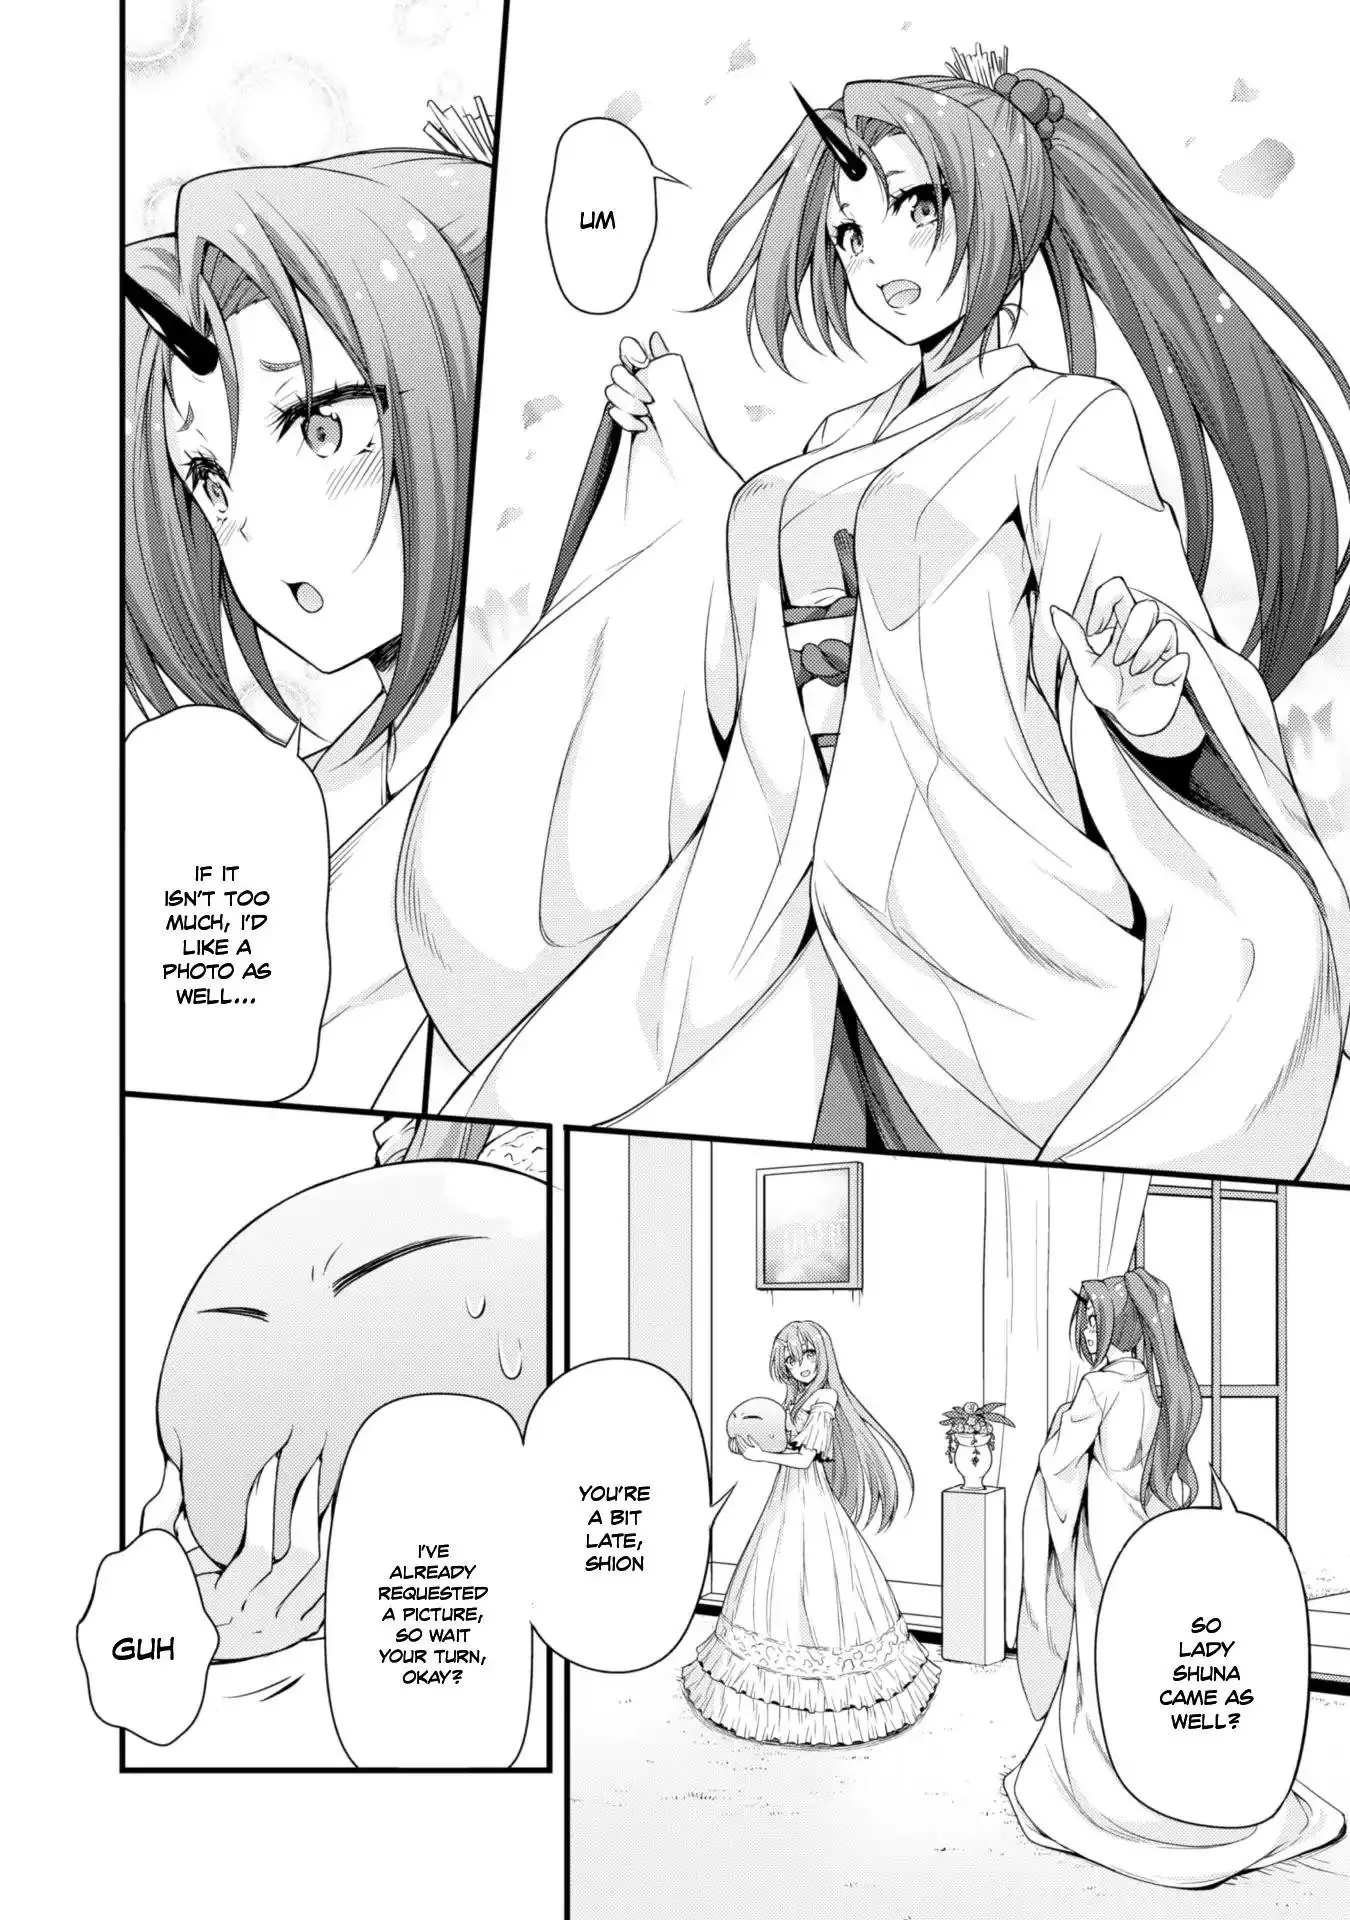 Tensei Shitara Slime Datta Ken: The Ways of Strolling in the Demon Country - 13 page 7